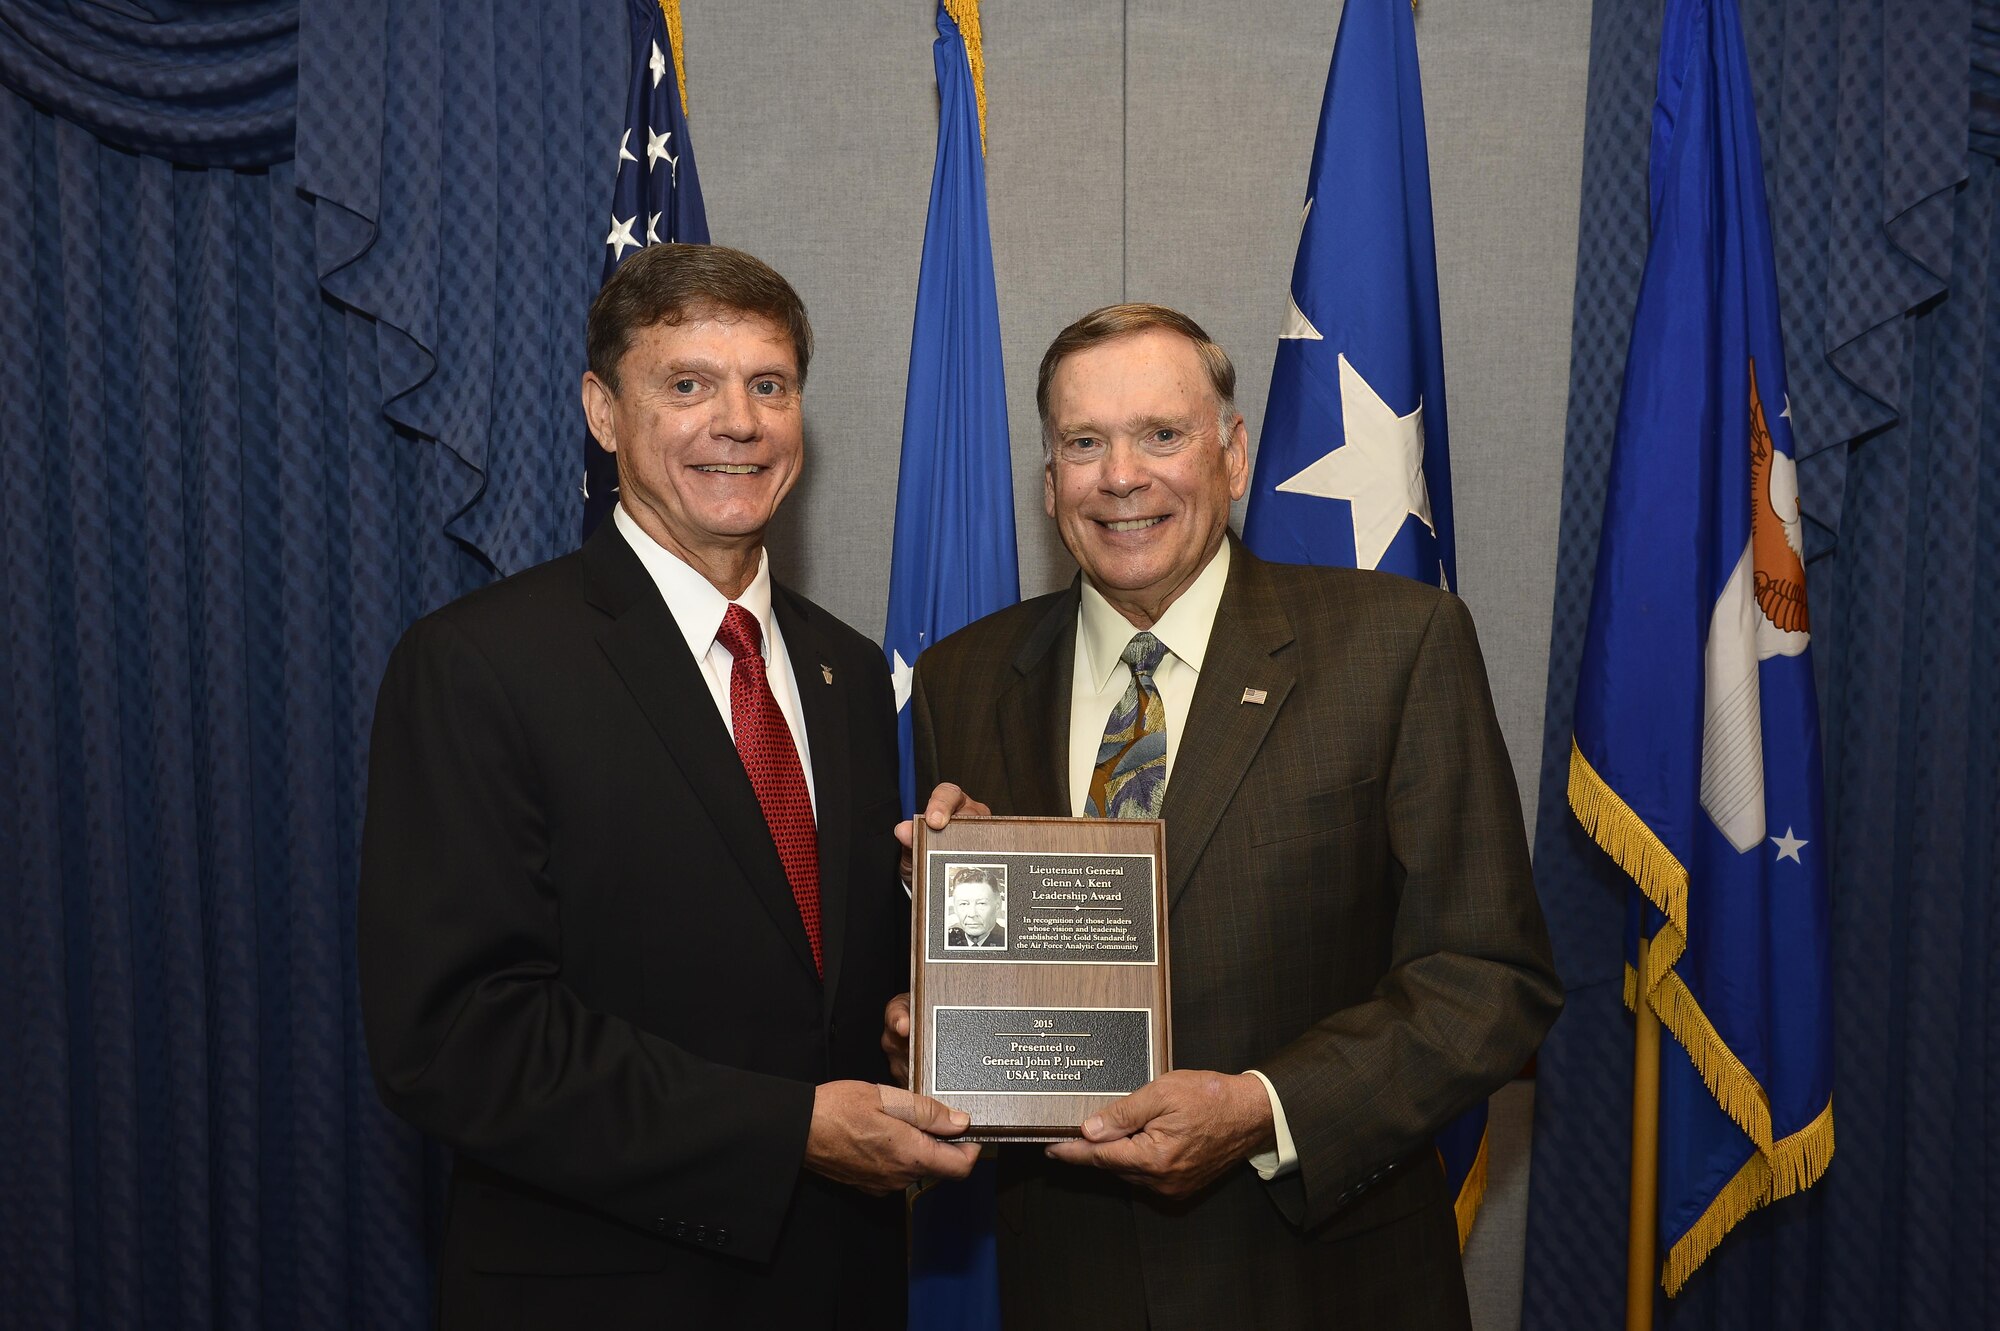 Kevin Williams, the director of Air Force Studies, Analyses and Assessments, presents the Lt. Gen. Glenn A. Kent Leadership Award to former Air Force Chief of Staff Gen. John P. Jumper at the Pentagon on June 11, 2016. The Kent award recognizes influential leaders who’ve had substantive analytic responsibilities during their career and whose vision and leadership have had a significant and lasting effect on the achievements of Air Force analysis. (U.S. Air Force photo/Tech. Sgt. Anthony Nelson Jr.)